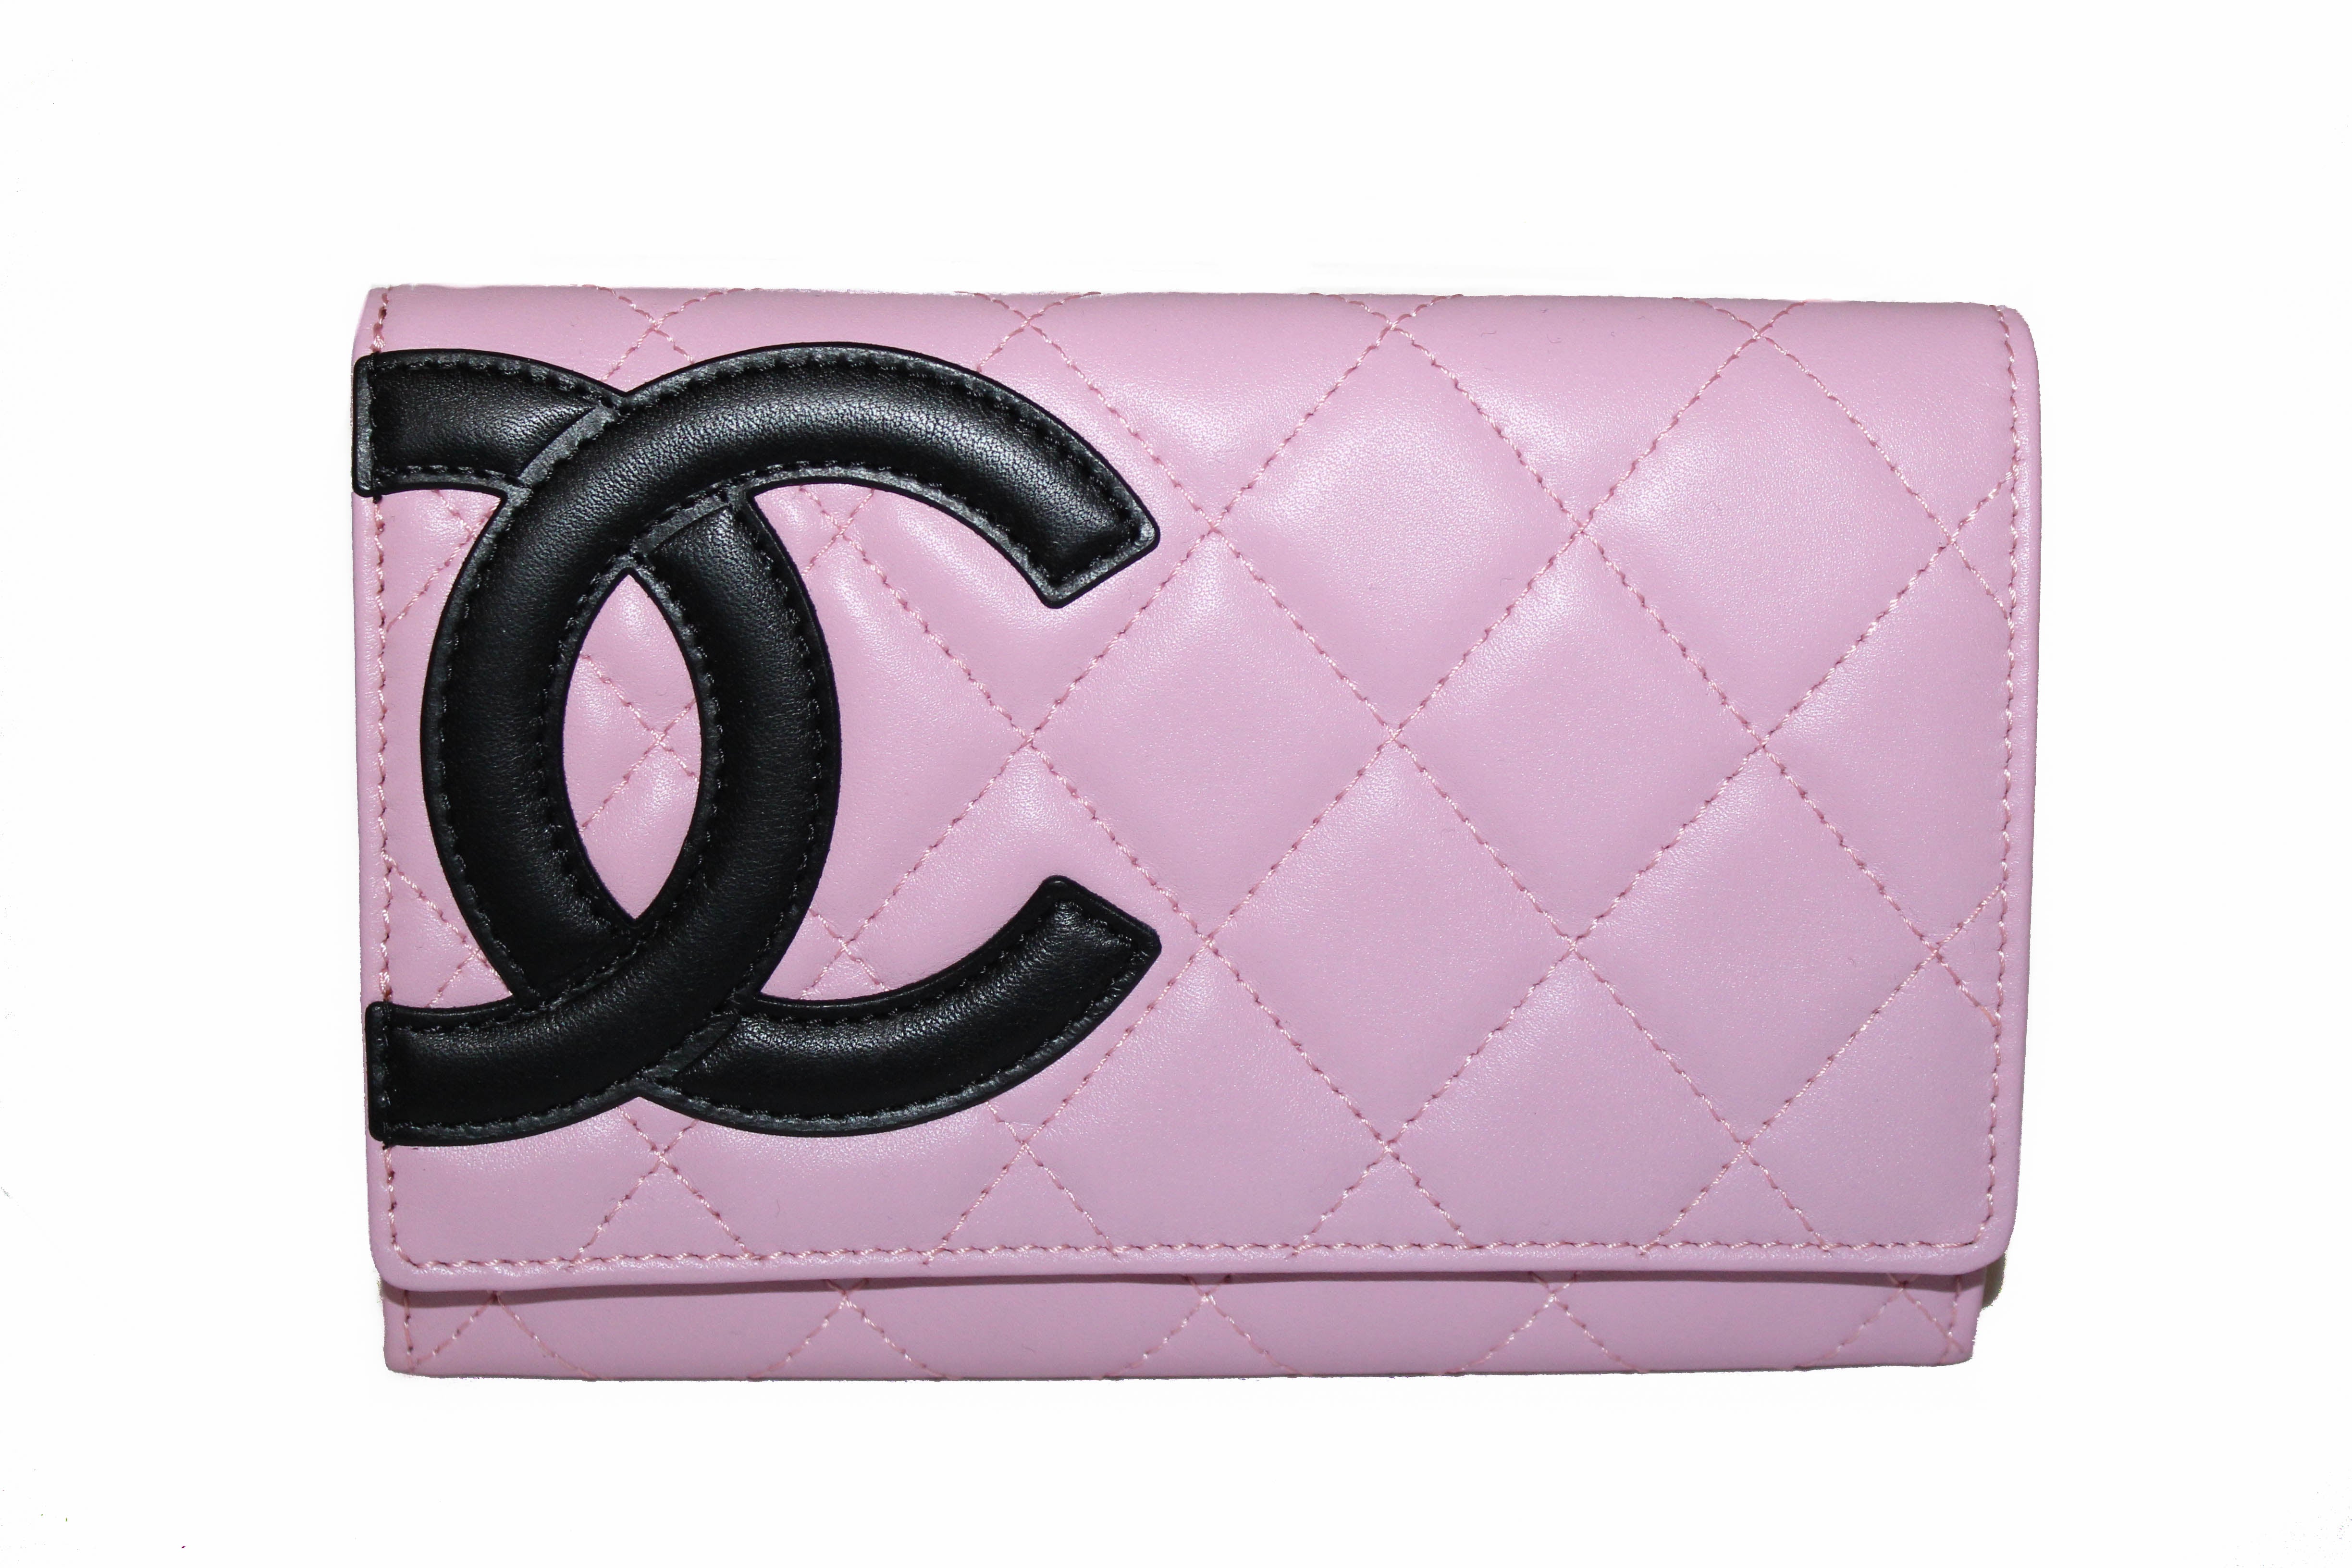 Authentic New Chanel Pink Quilted Cambon Lambskin Leather Medium Wallet